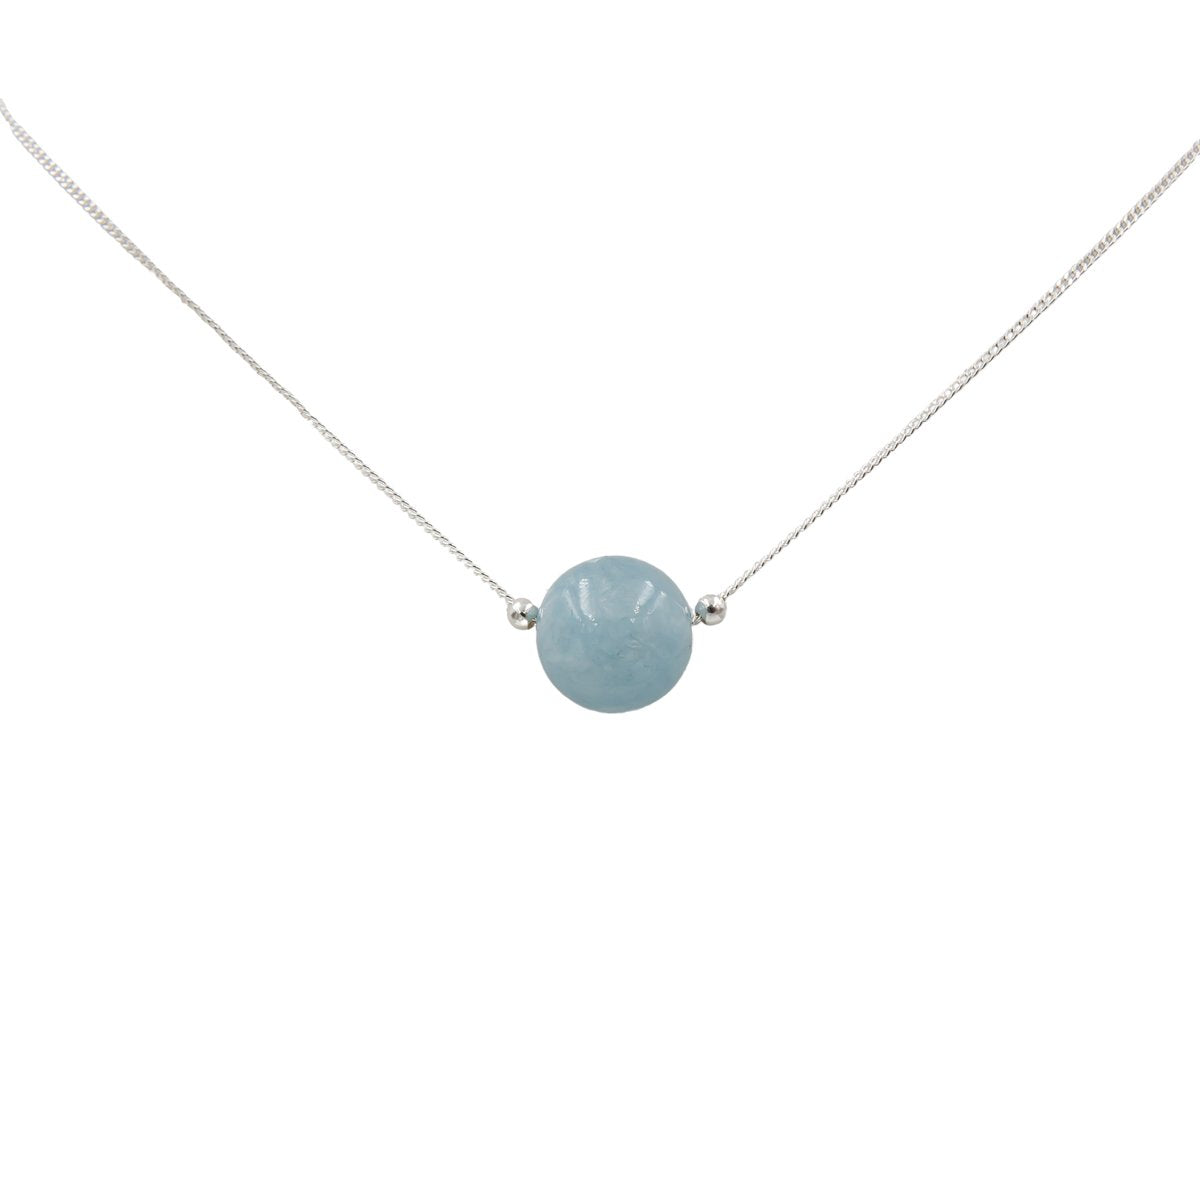 Earth Song Jewelry - Handmade Sterling Silver Aquamarine Solitaire Necklace